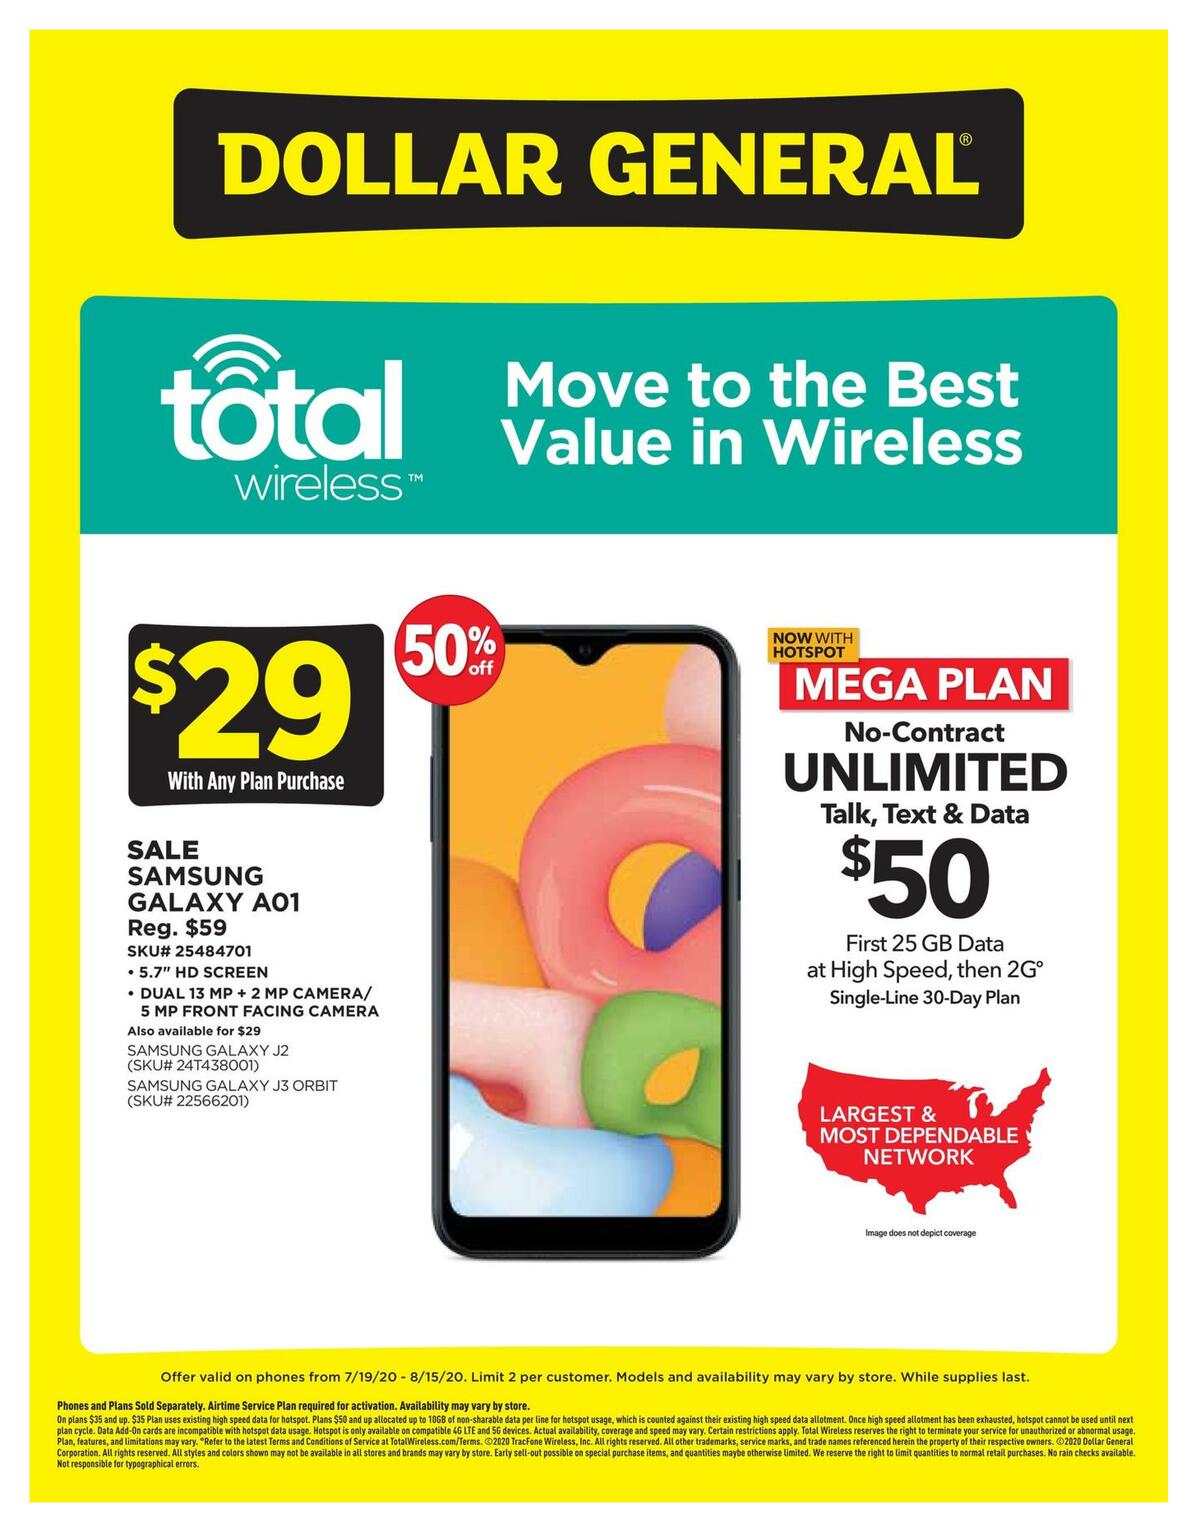 Dollar General Weekly Wireless Specials Weekly Ad from July 19